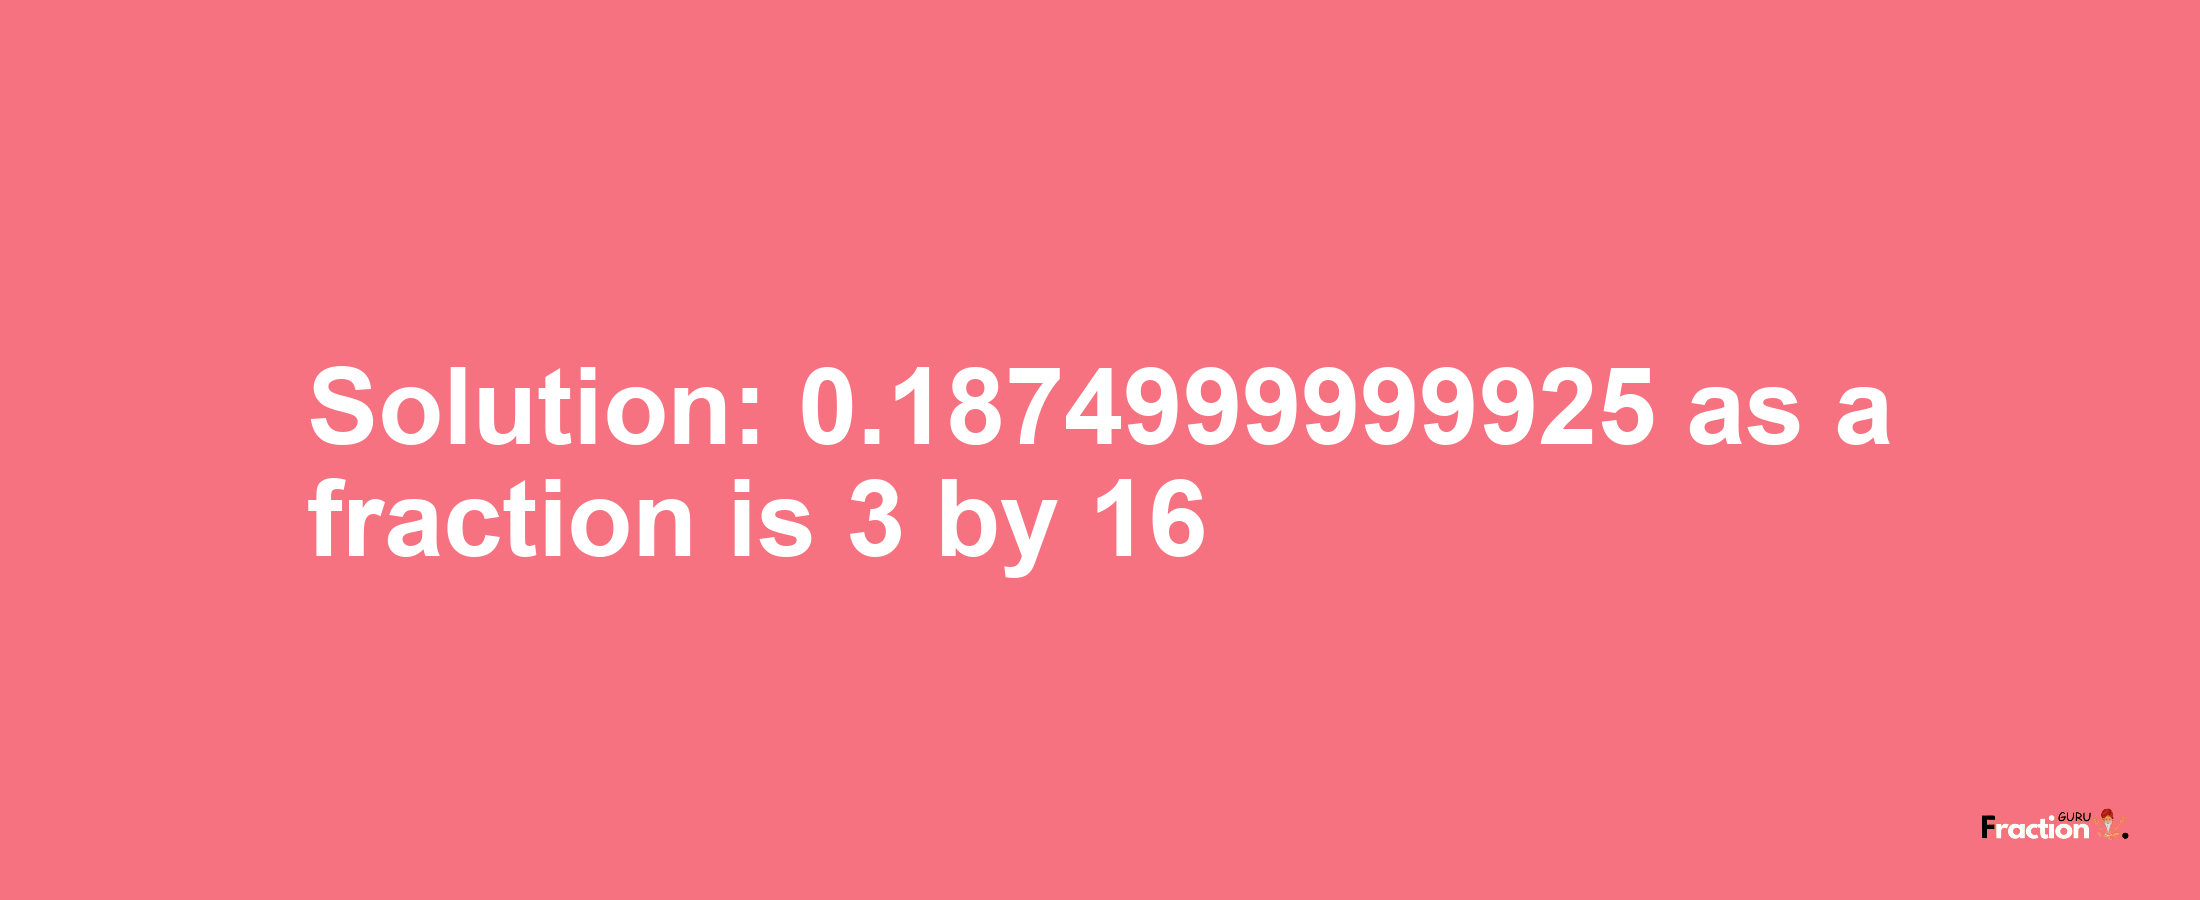 Solution:0.1874999999925 as a fraction is 3/16